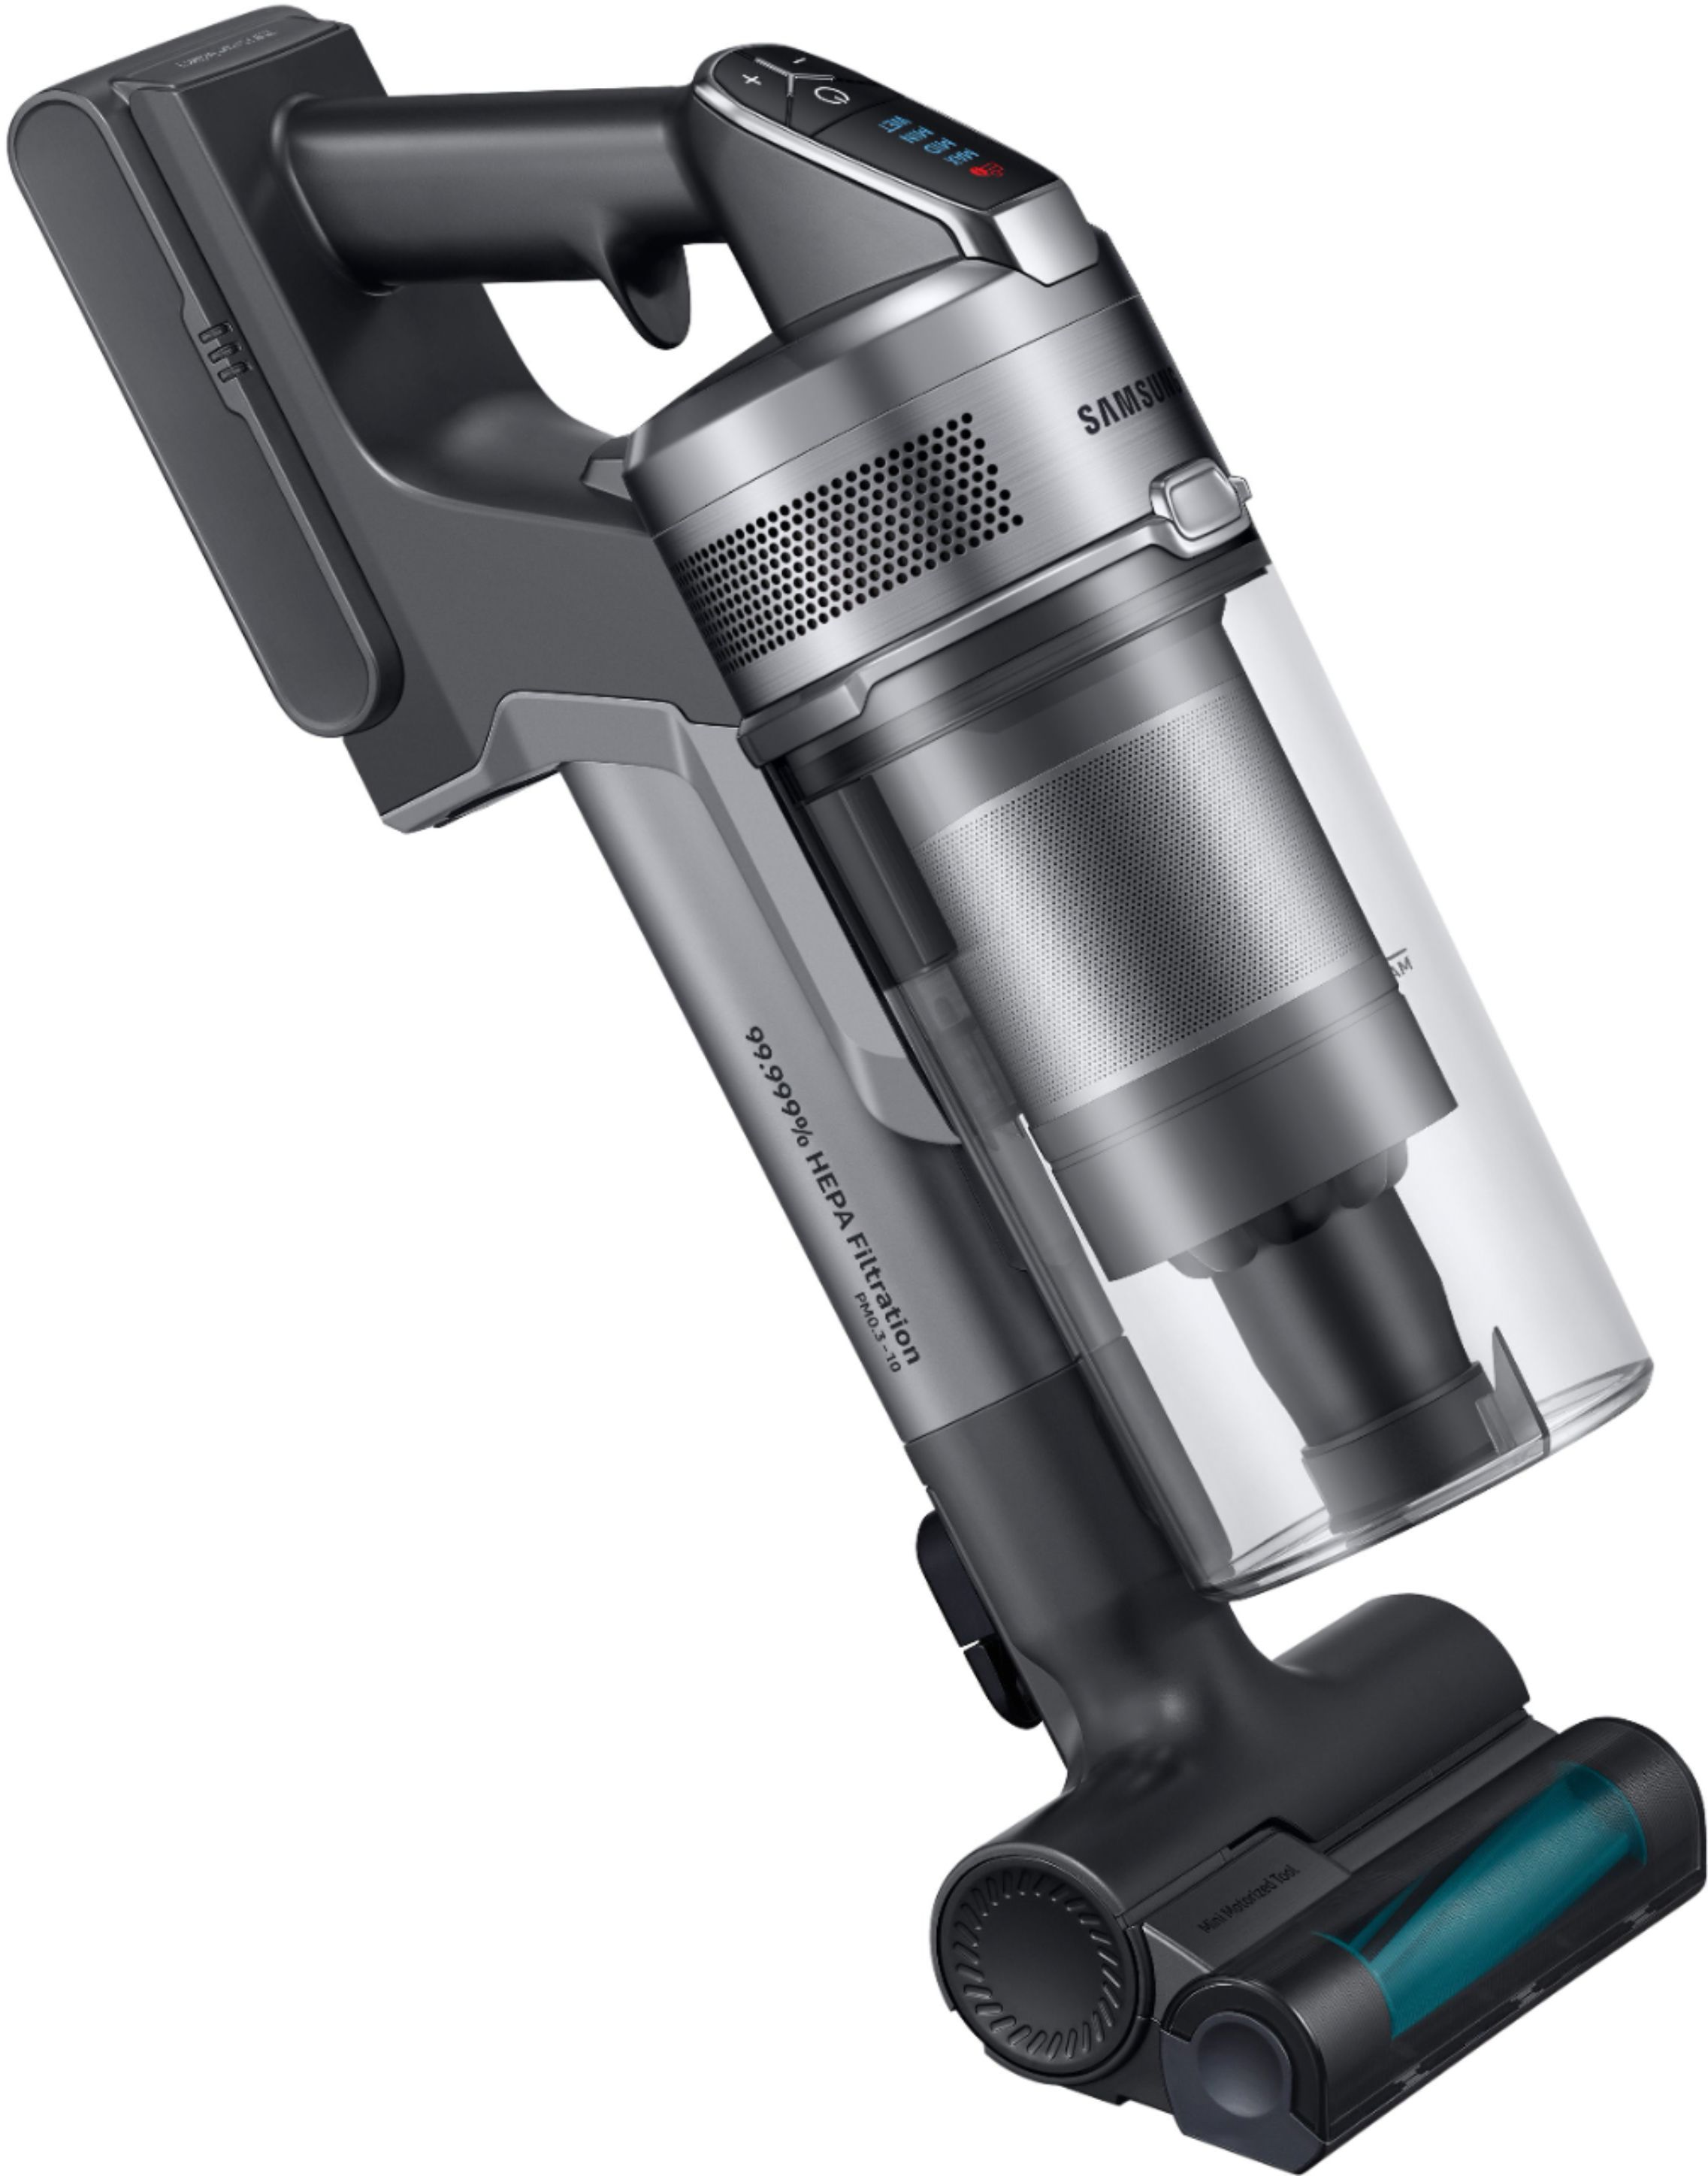 Best Buy: Samsung Jet™ 75 Teal with Long-Lasting Filter ChroMetal Silver Battery Cordless VS20T7536T5/AA Stick Vacuum with Complete